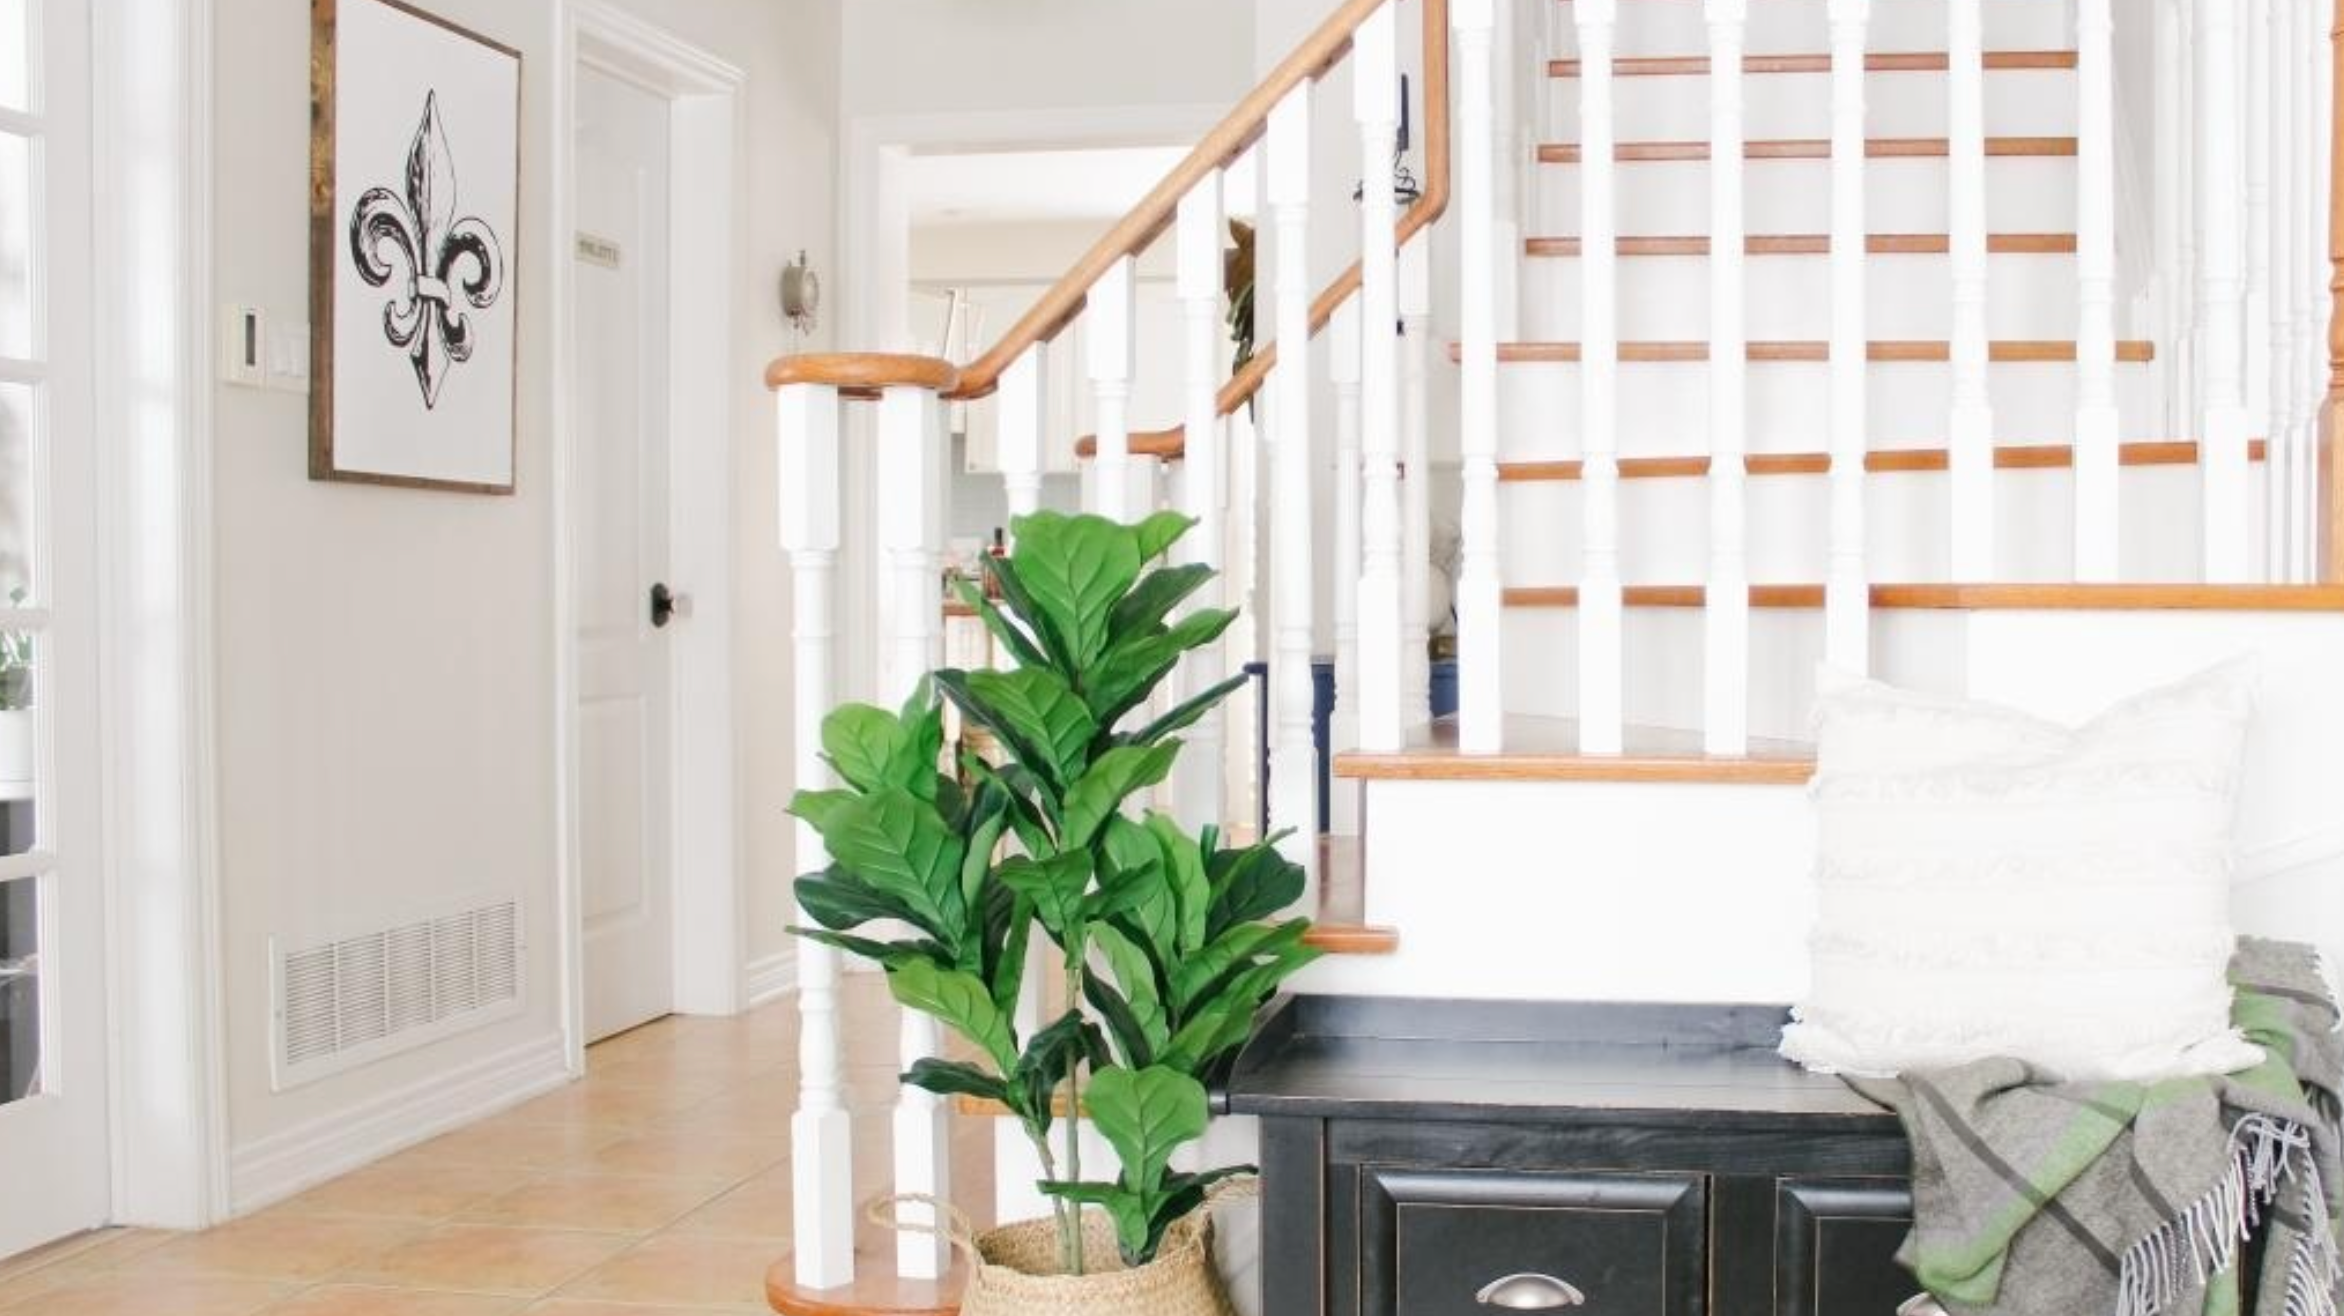 6 Things To Consider When Buying An Indoor Plant For Winter